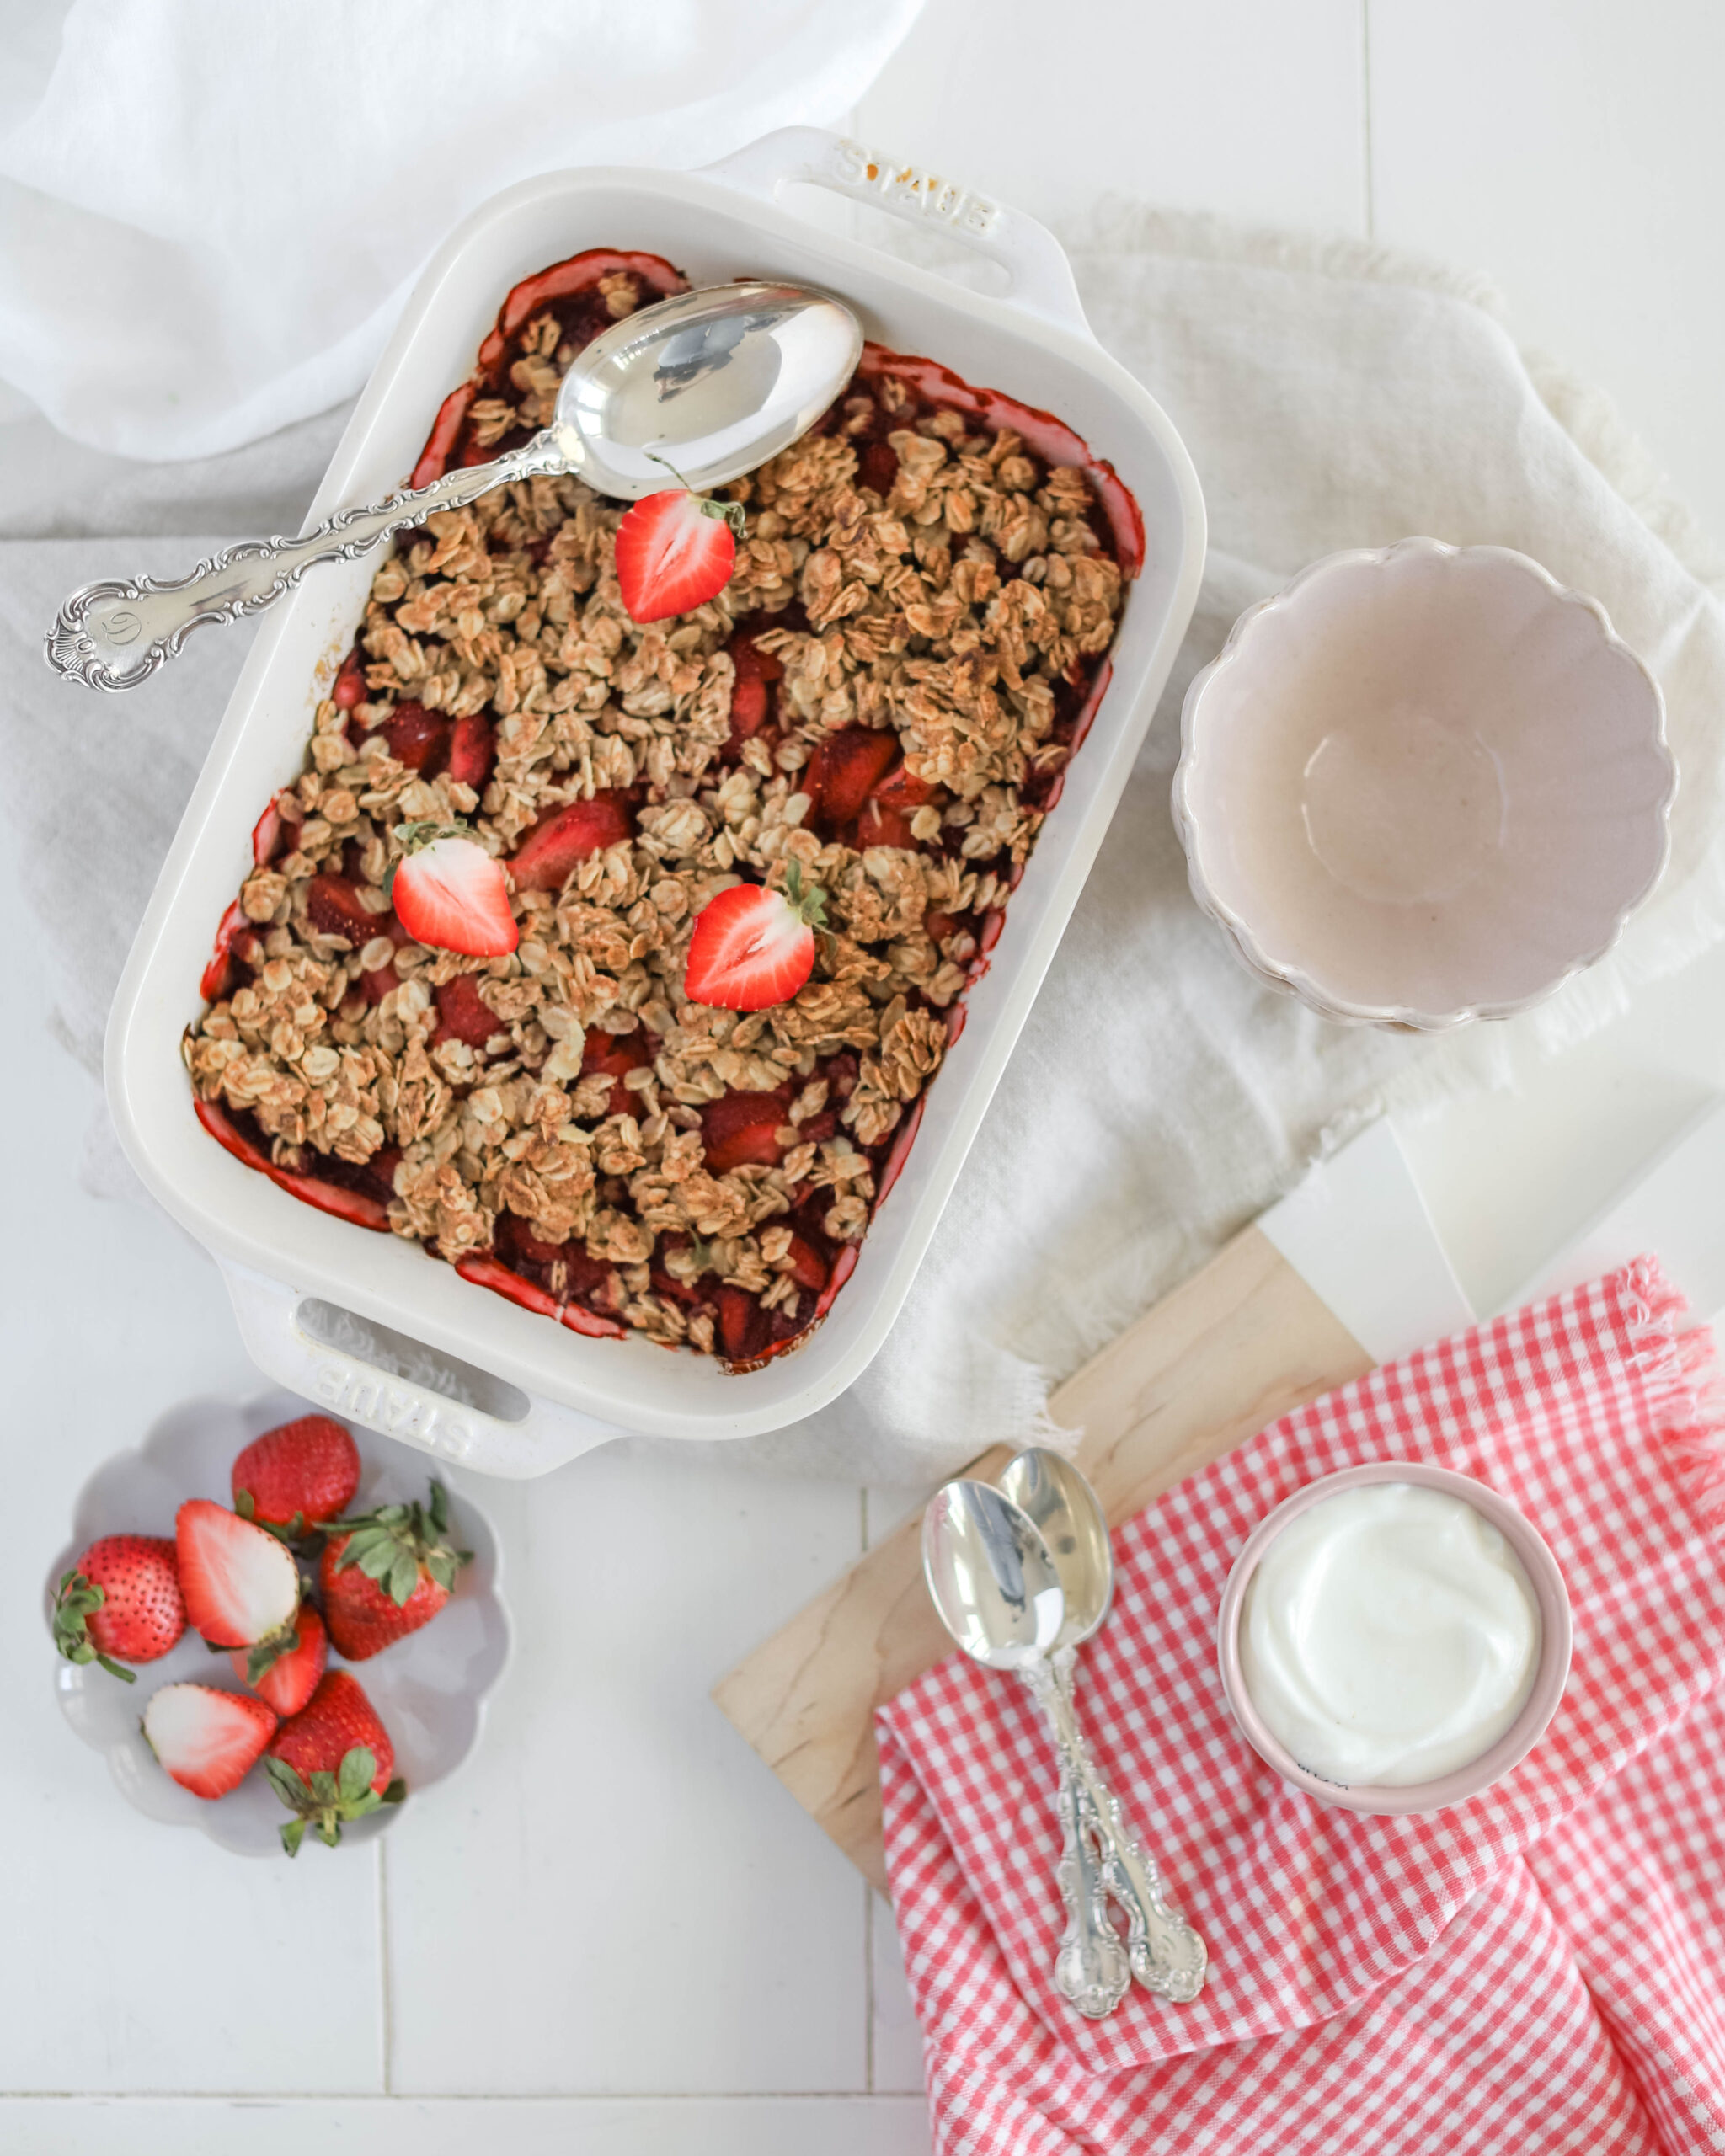 Fraîche Table: Strawberry Breakfast Crisp in baking dish with spoons and side bowls